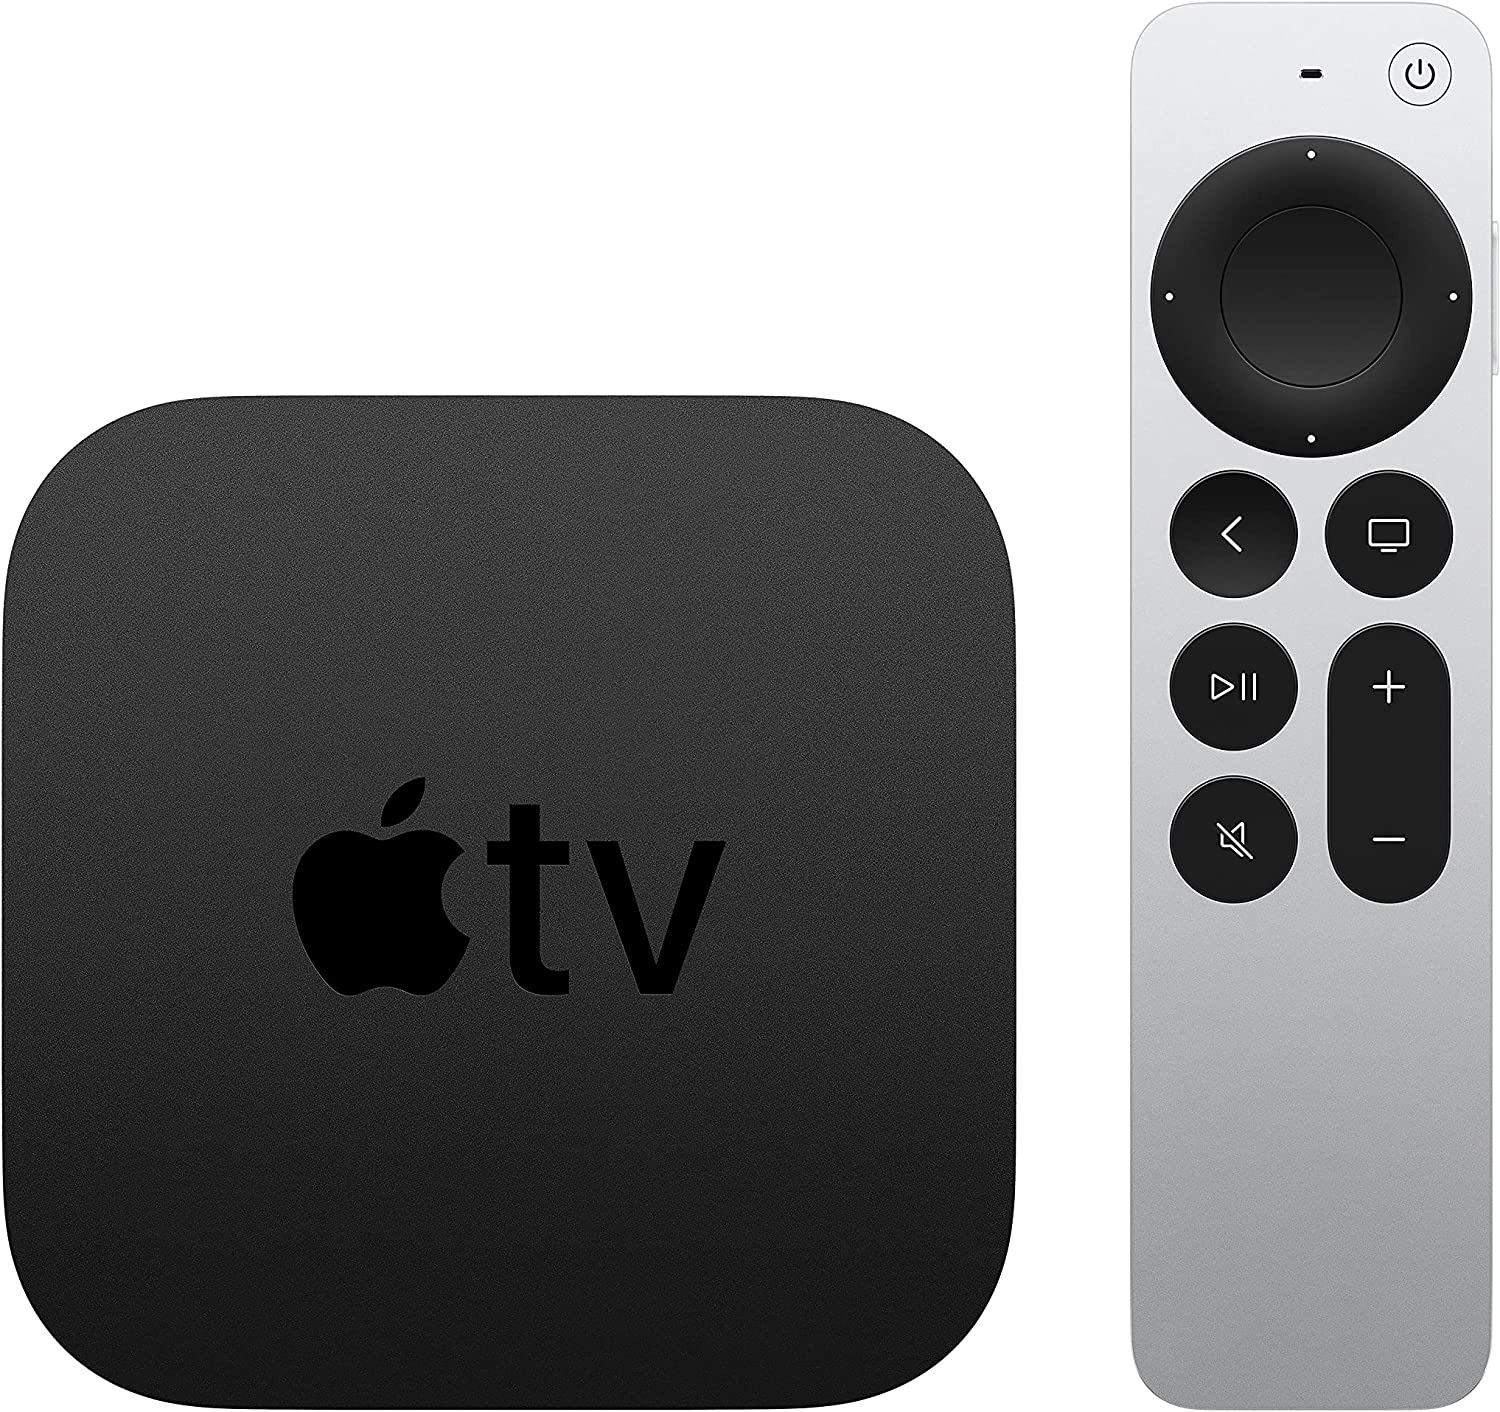 syndrom værdighed Børnehave Apple TV 32GB vs 64GB - Which One to Choose?